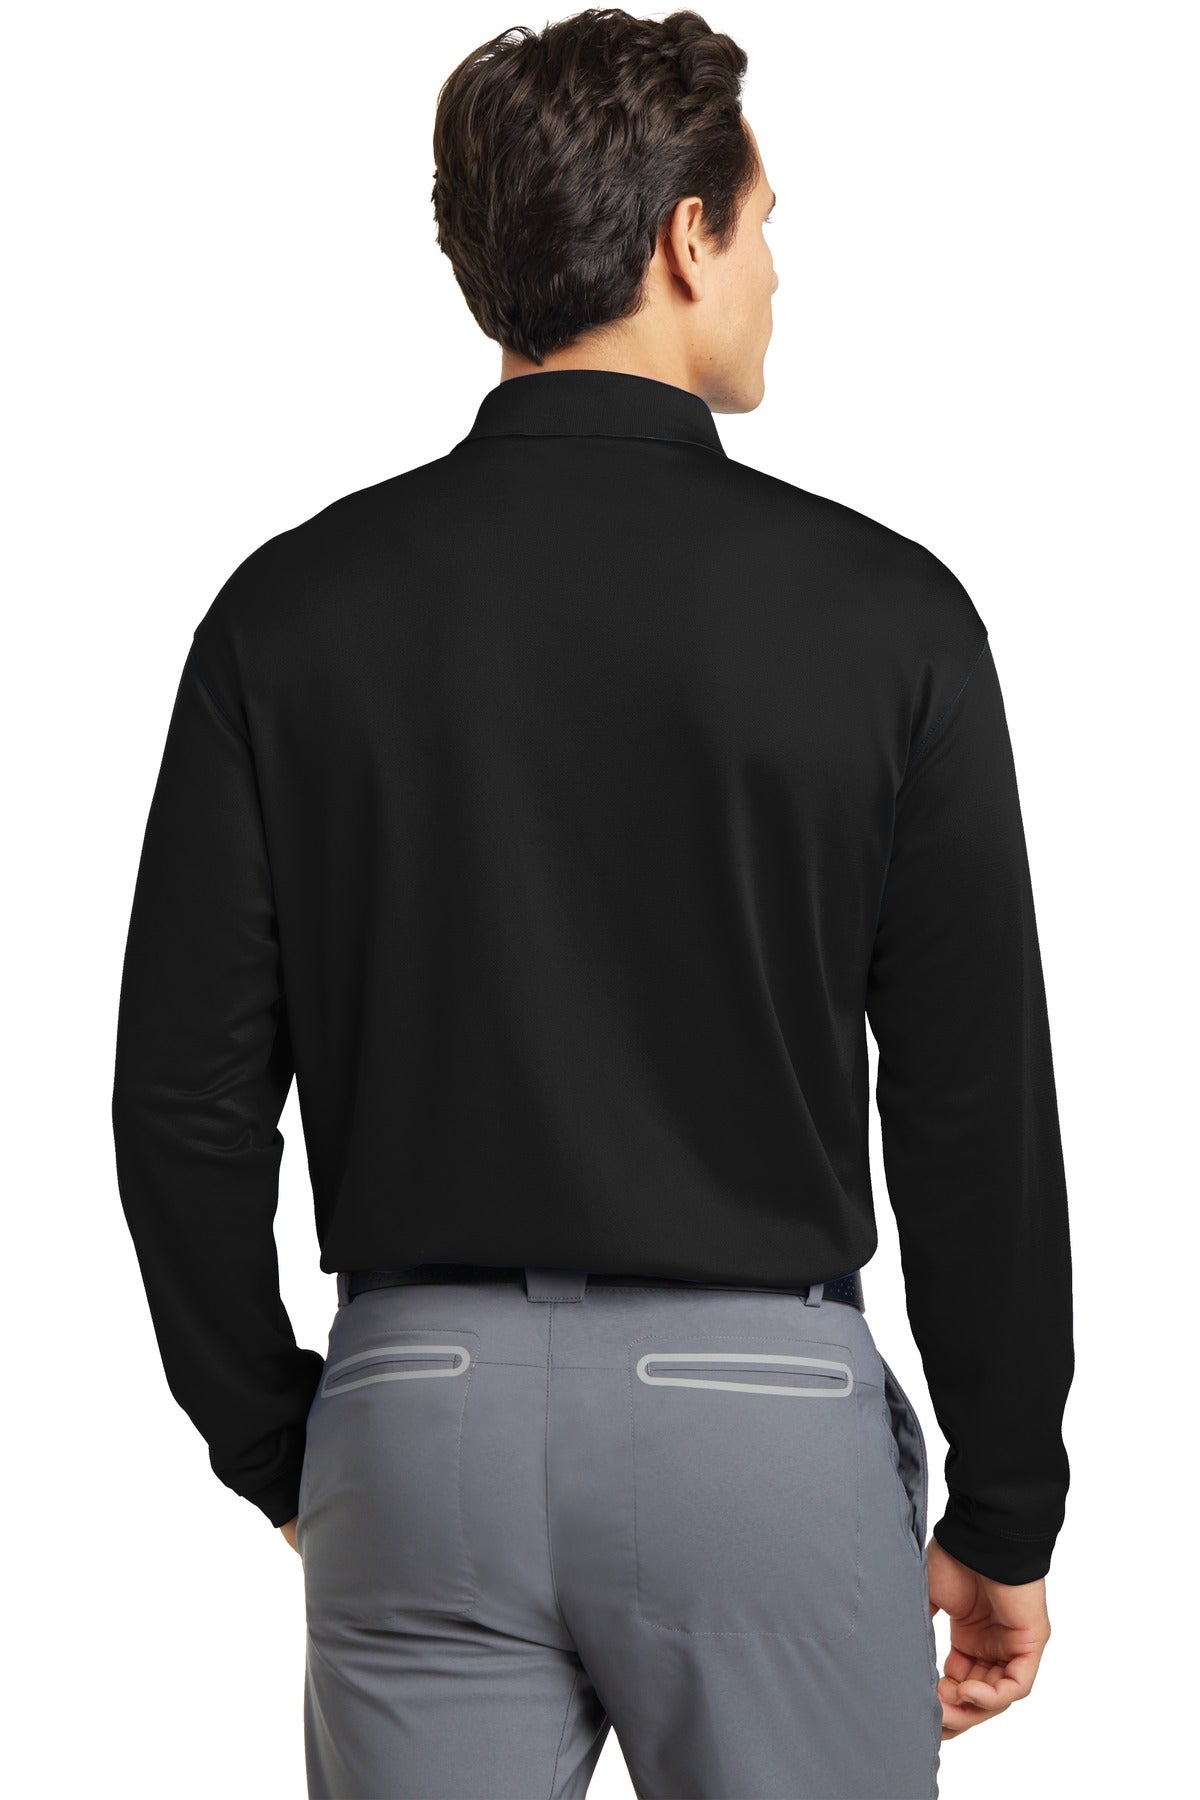 Nike Tall Long Sleeve Dri-FIT Stretch Tech Polo, Product